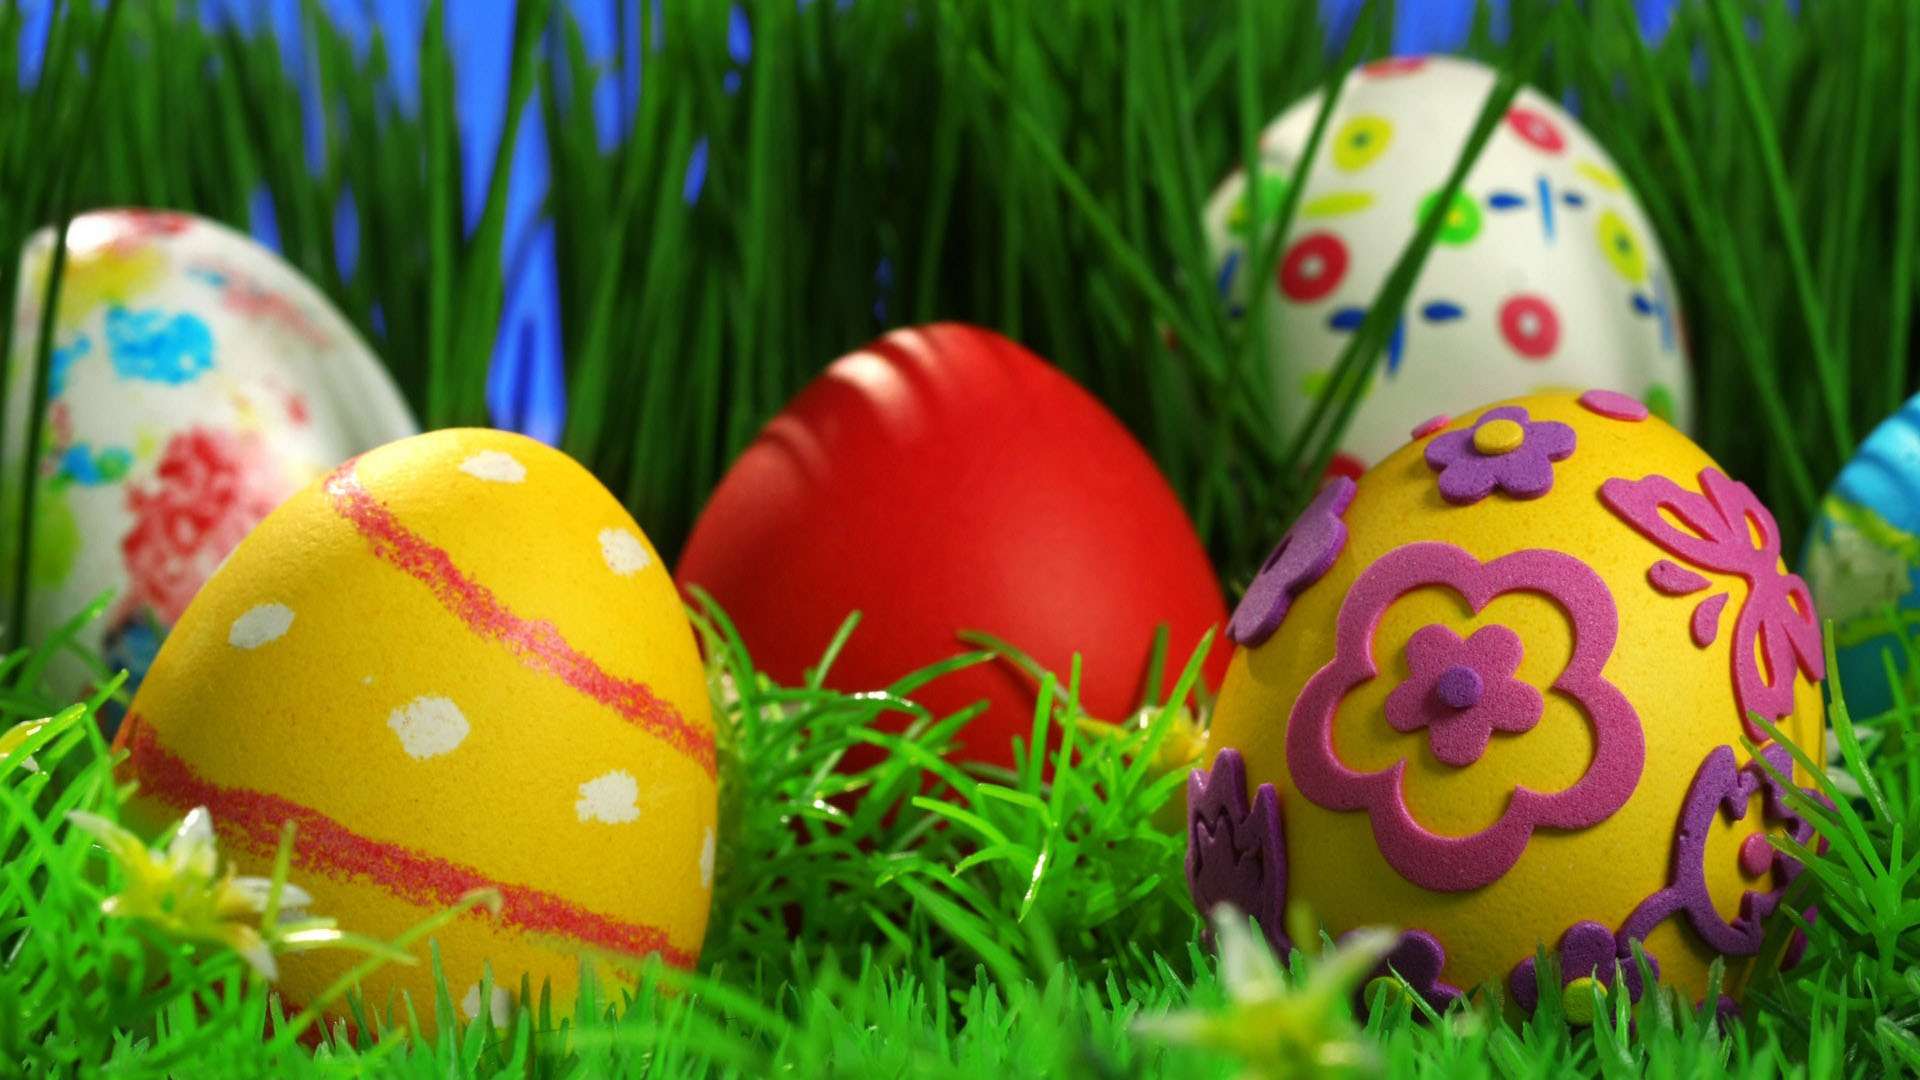 Decorated Easter Eggs in Grass HD Wallpaper FullHDWpp HD